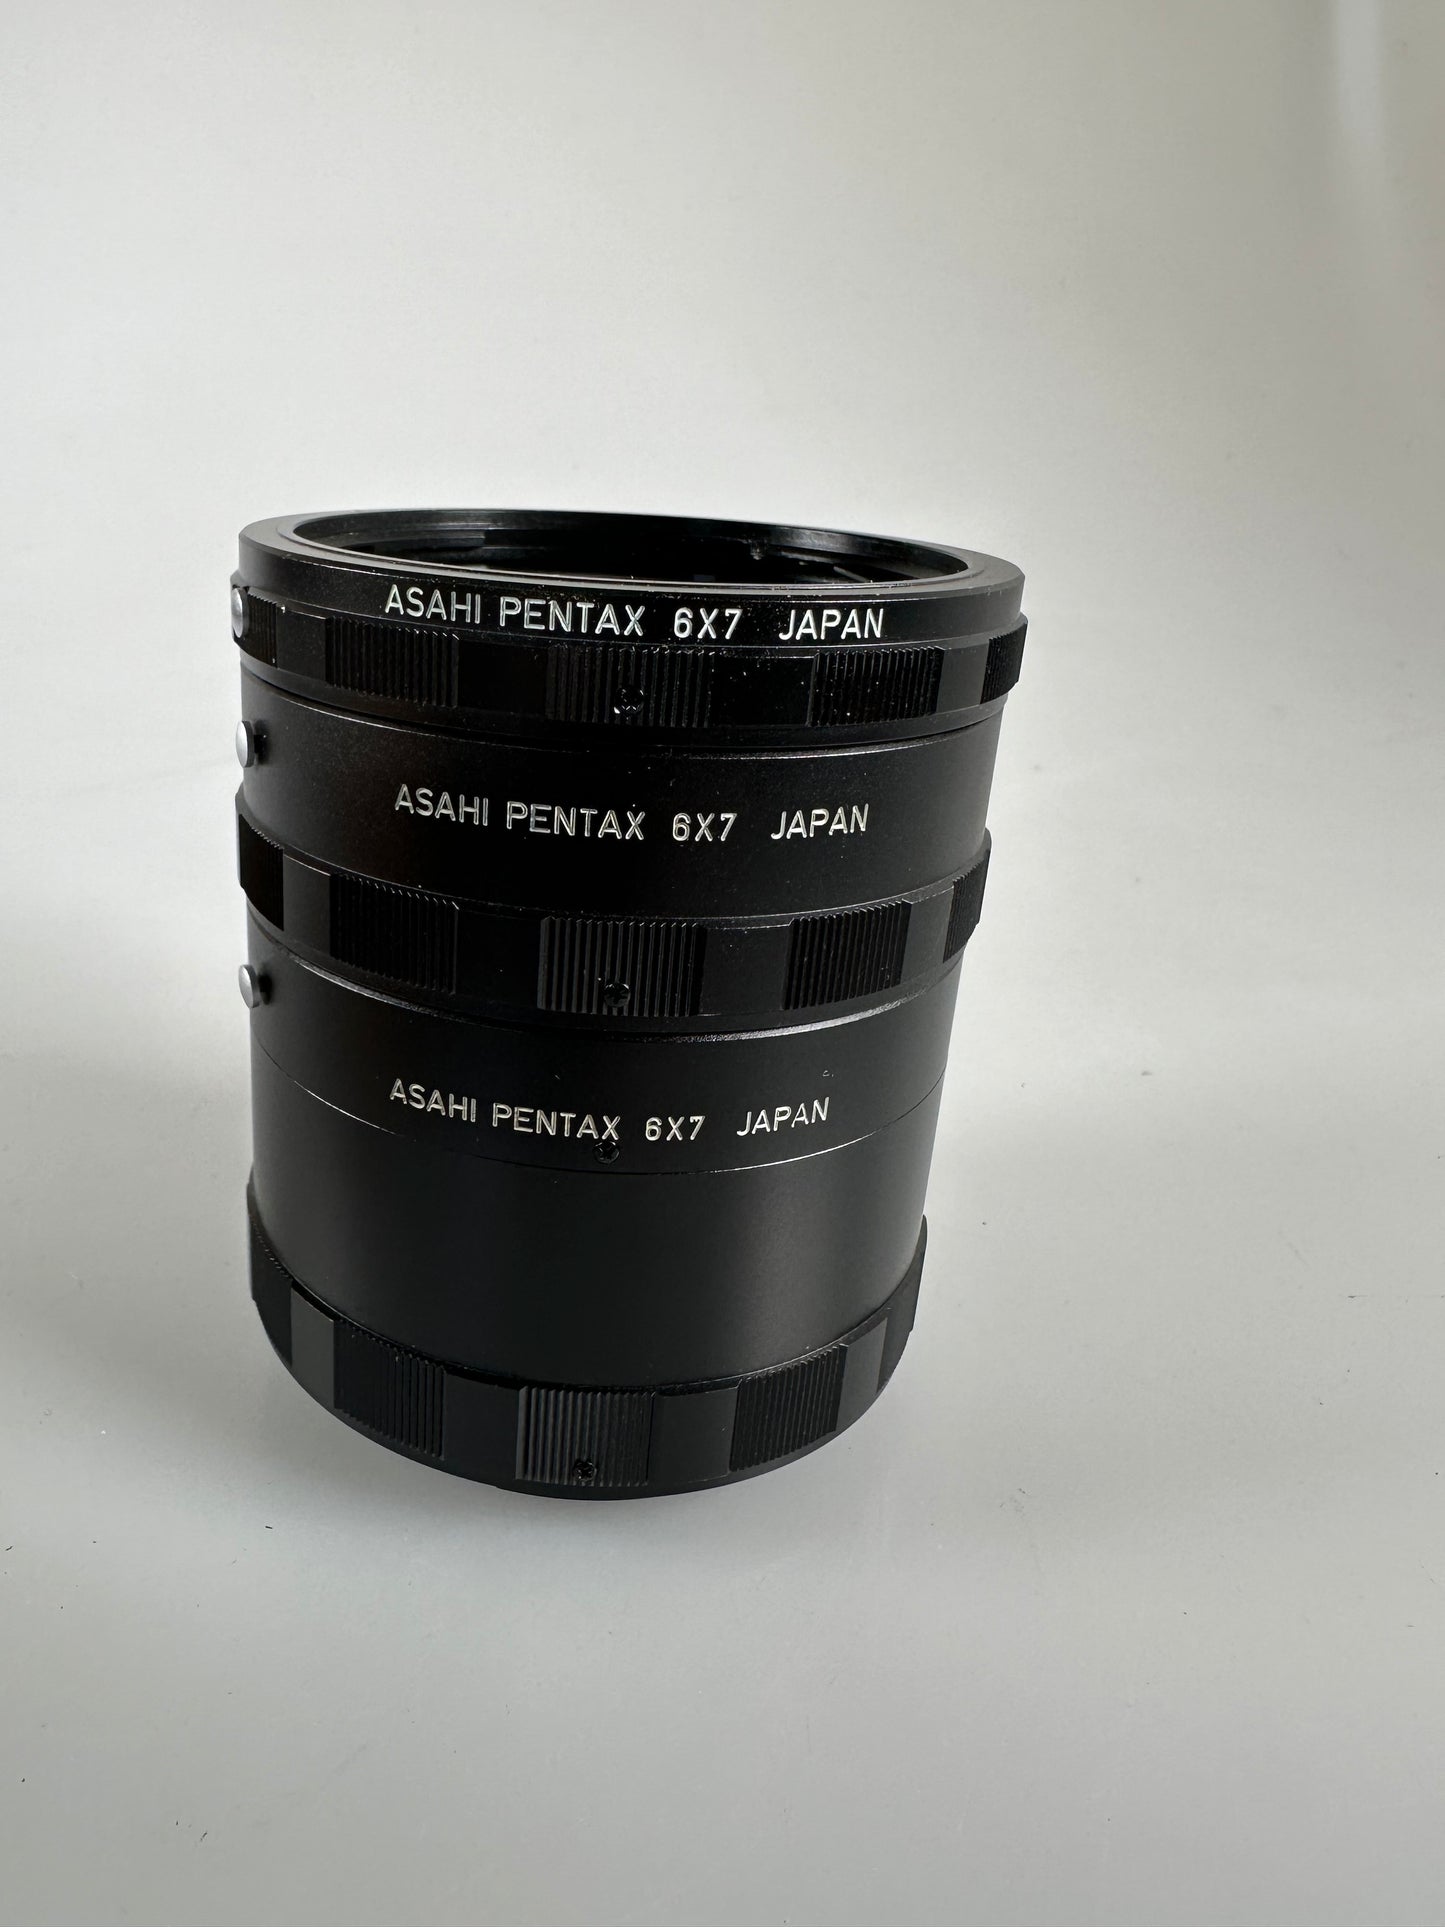 Pentax Auto Extension Tube for 67 6x7 number 1, 2, 3